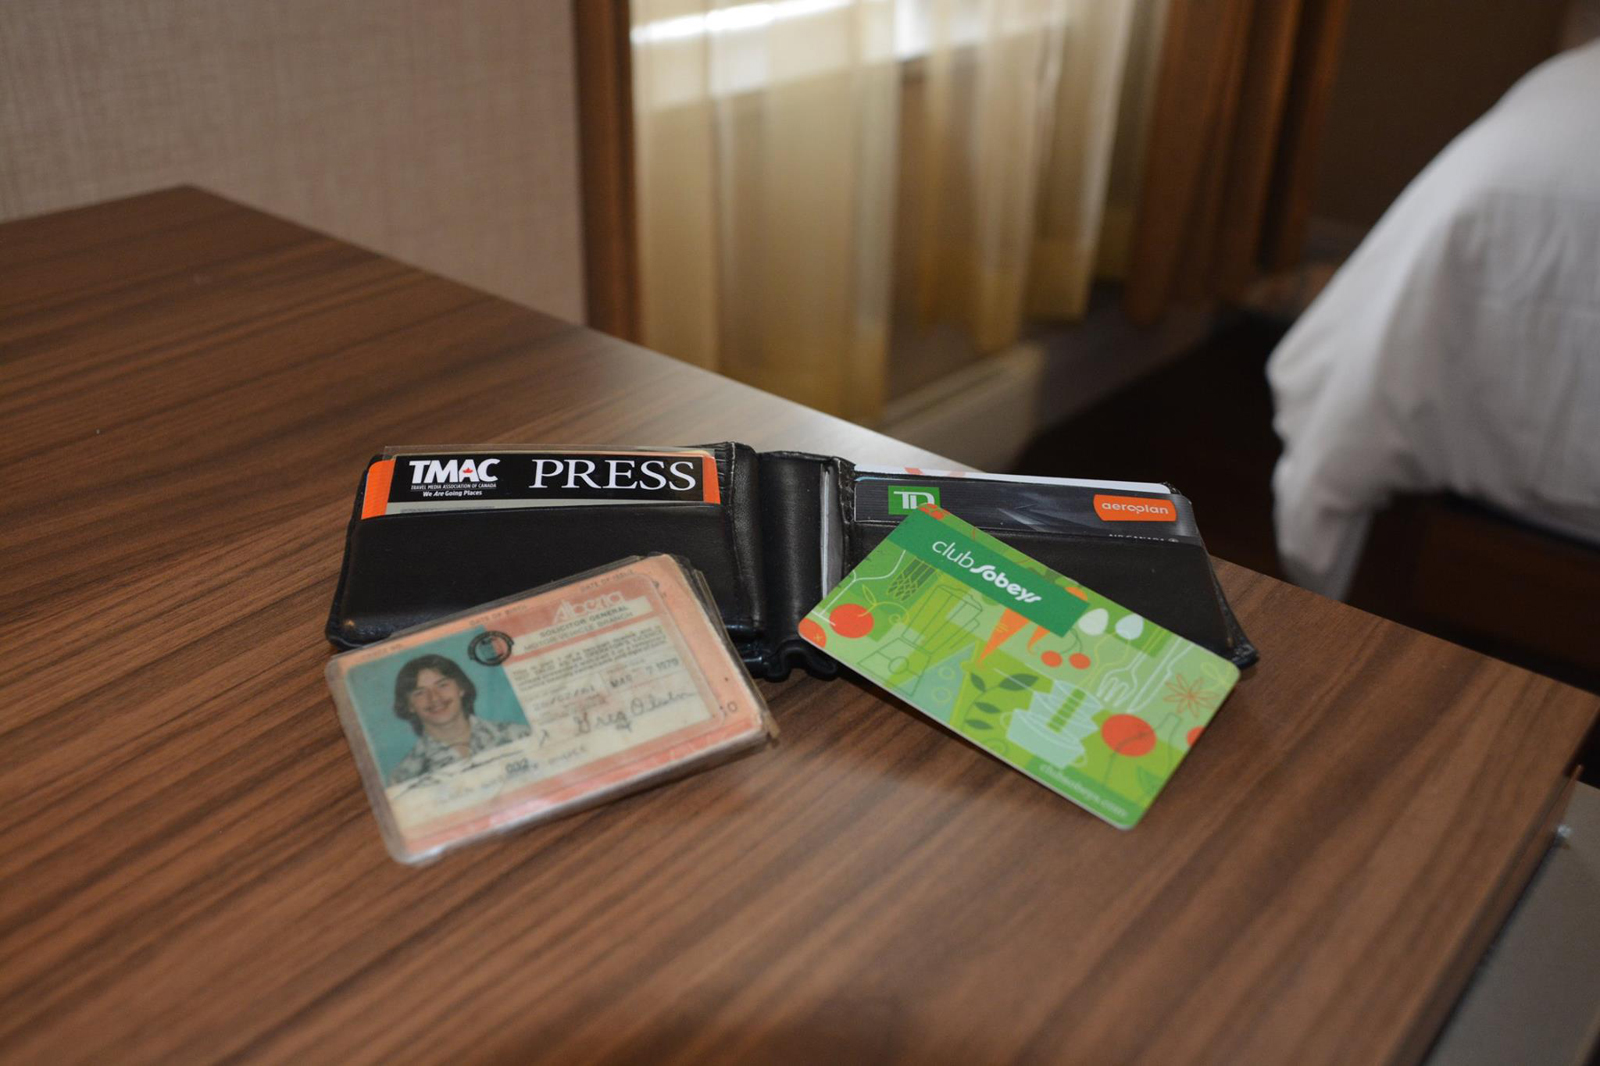 An image of a wallet with an old driver's license and expired cards